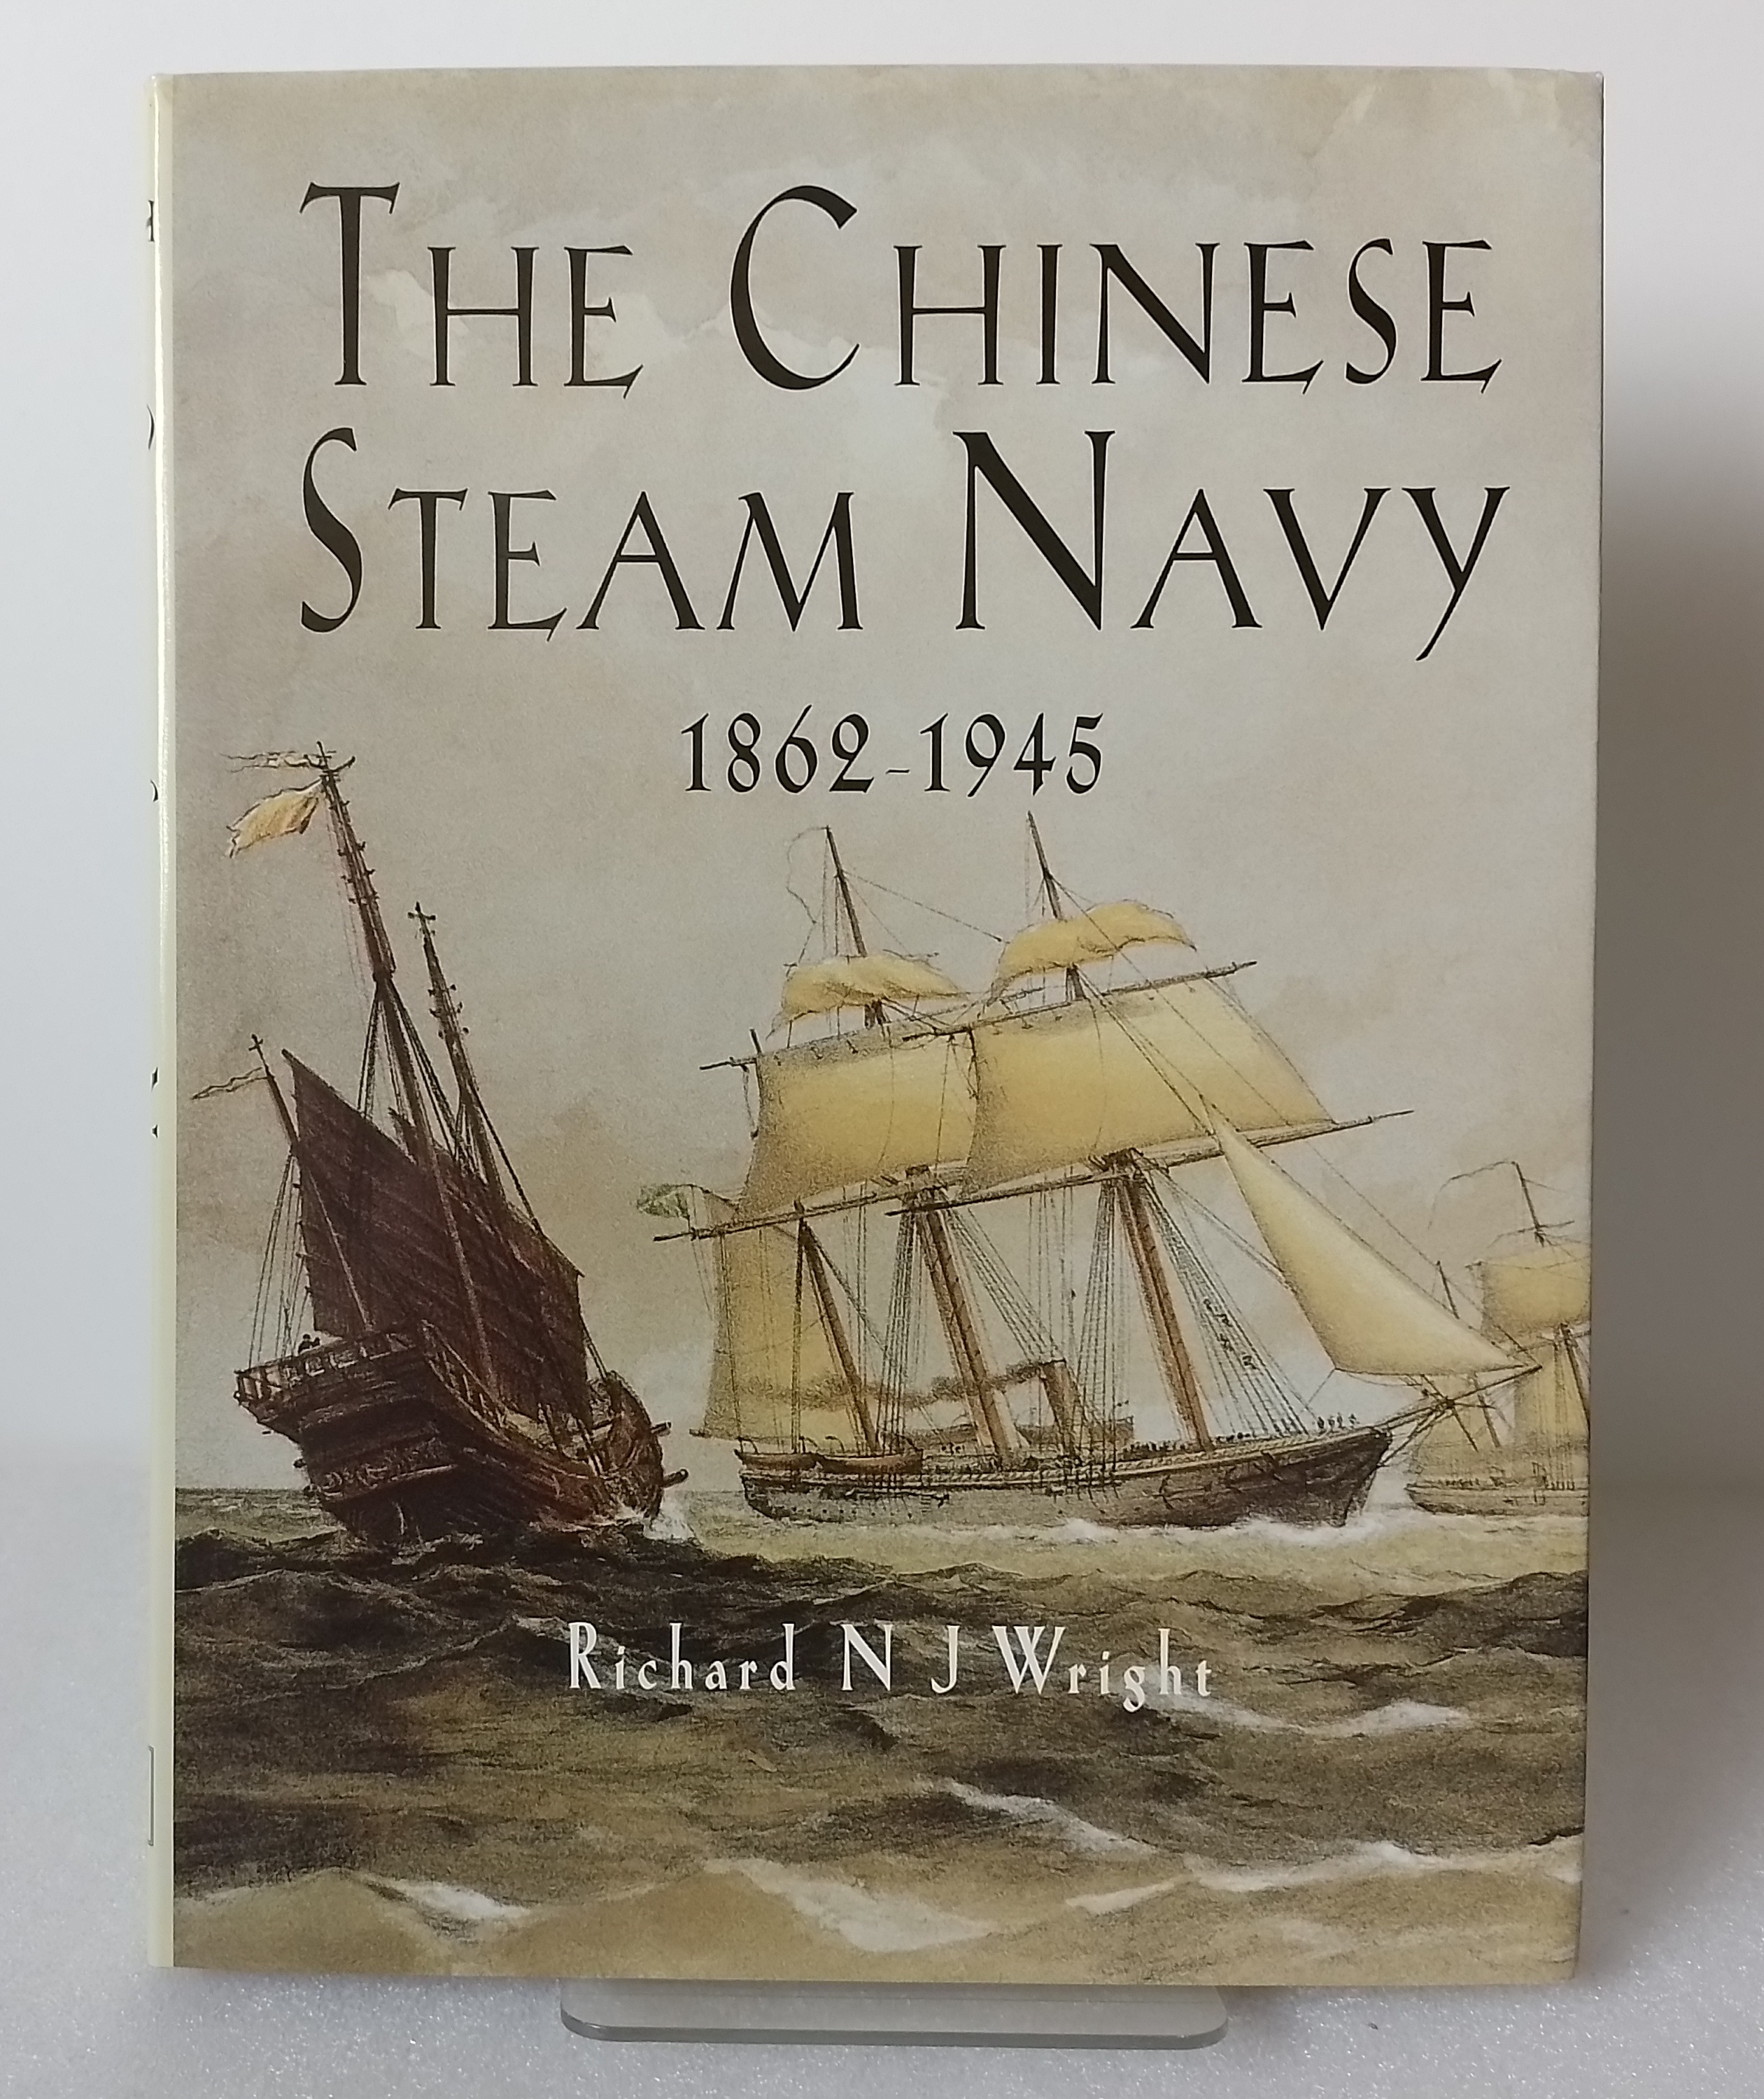 The Chinese Steam Navy, 1862-1945 - Richard N.J. Wright